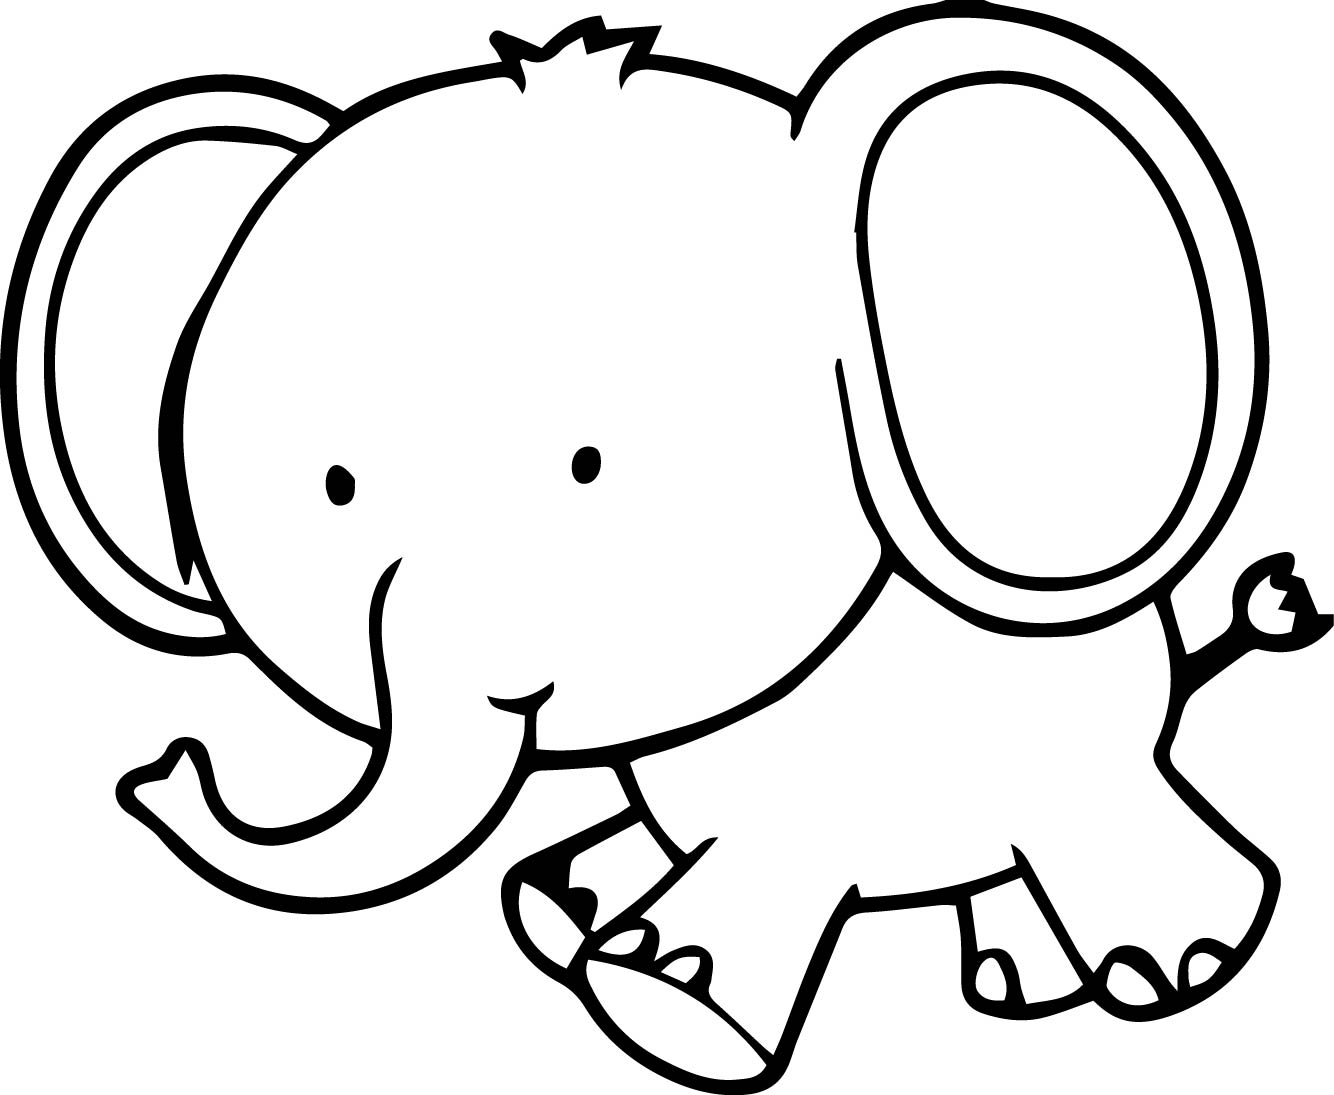 Elephant Coloring Pages | Free download on ClipArtMag